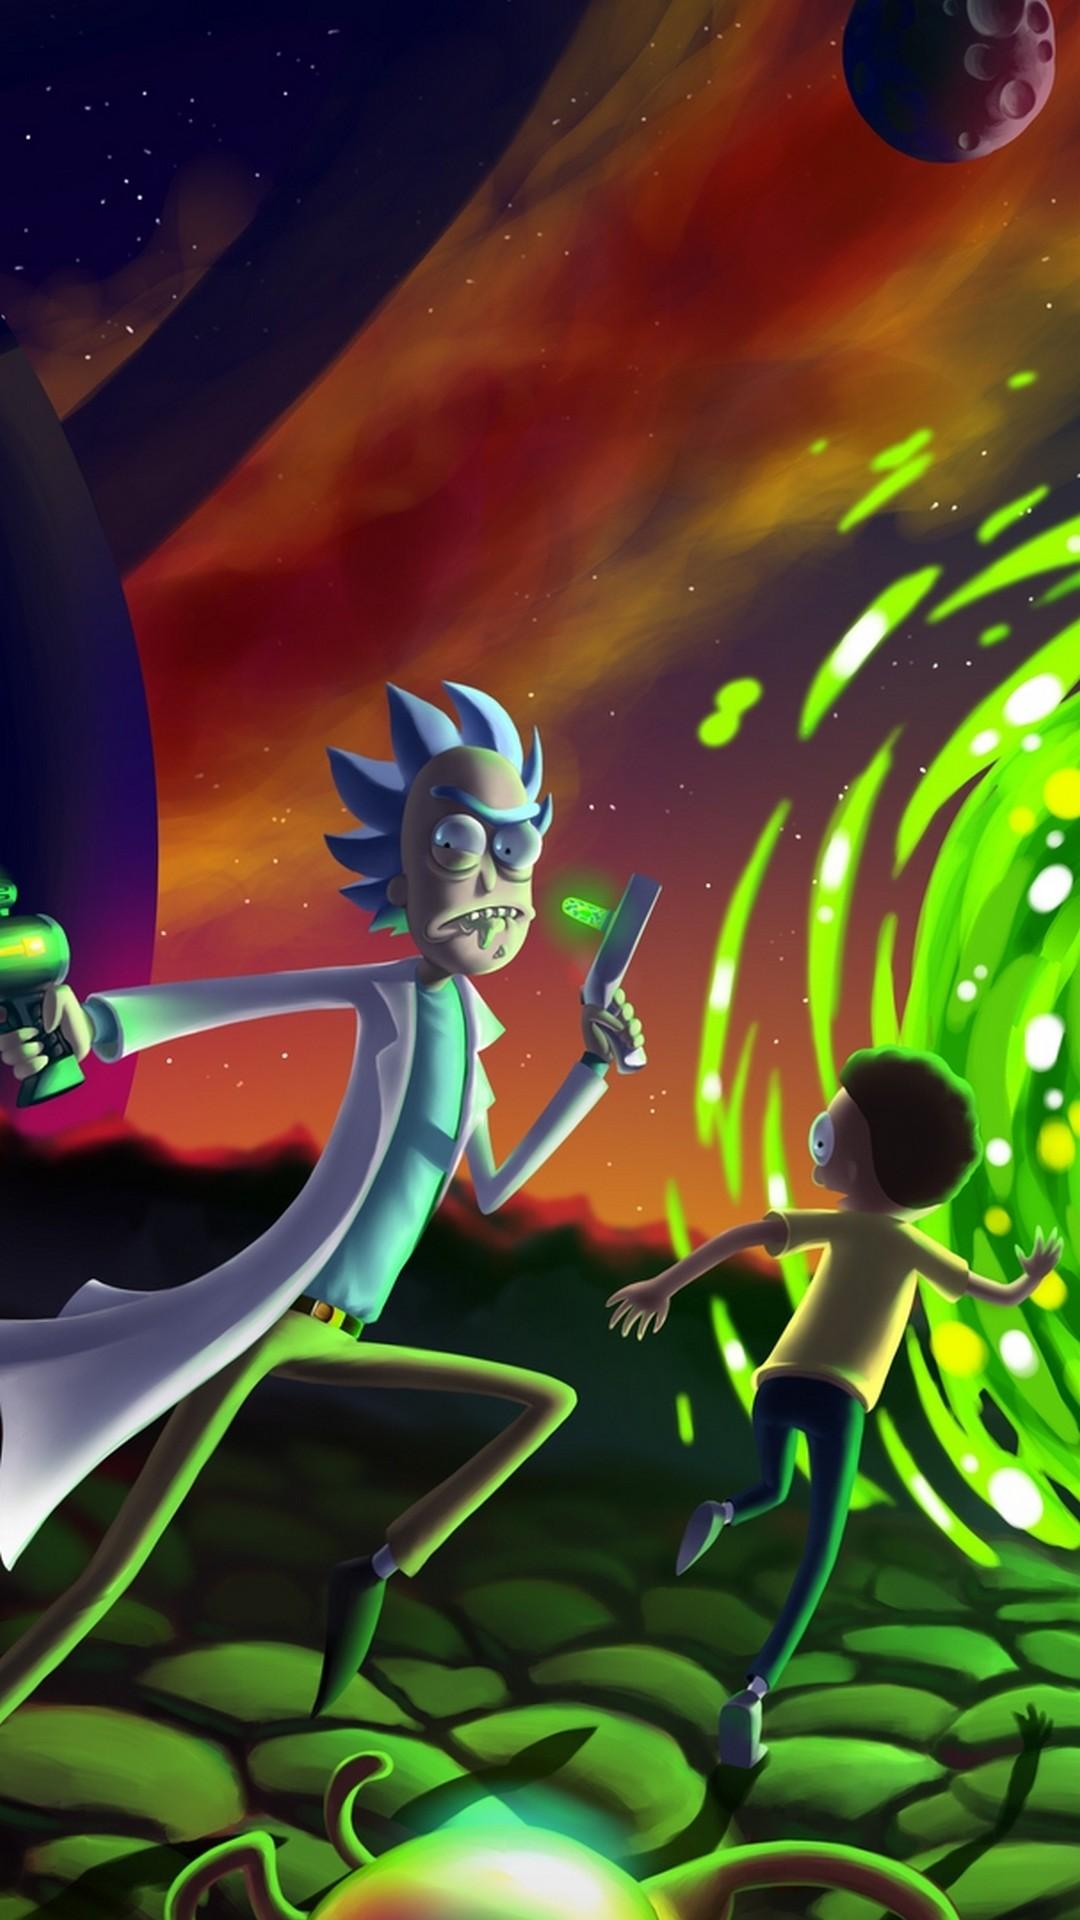 Download And Morty Pc, Download Wallpaper on Jakpost